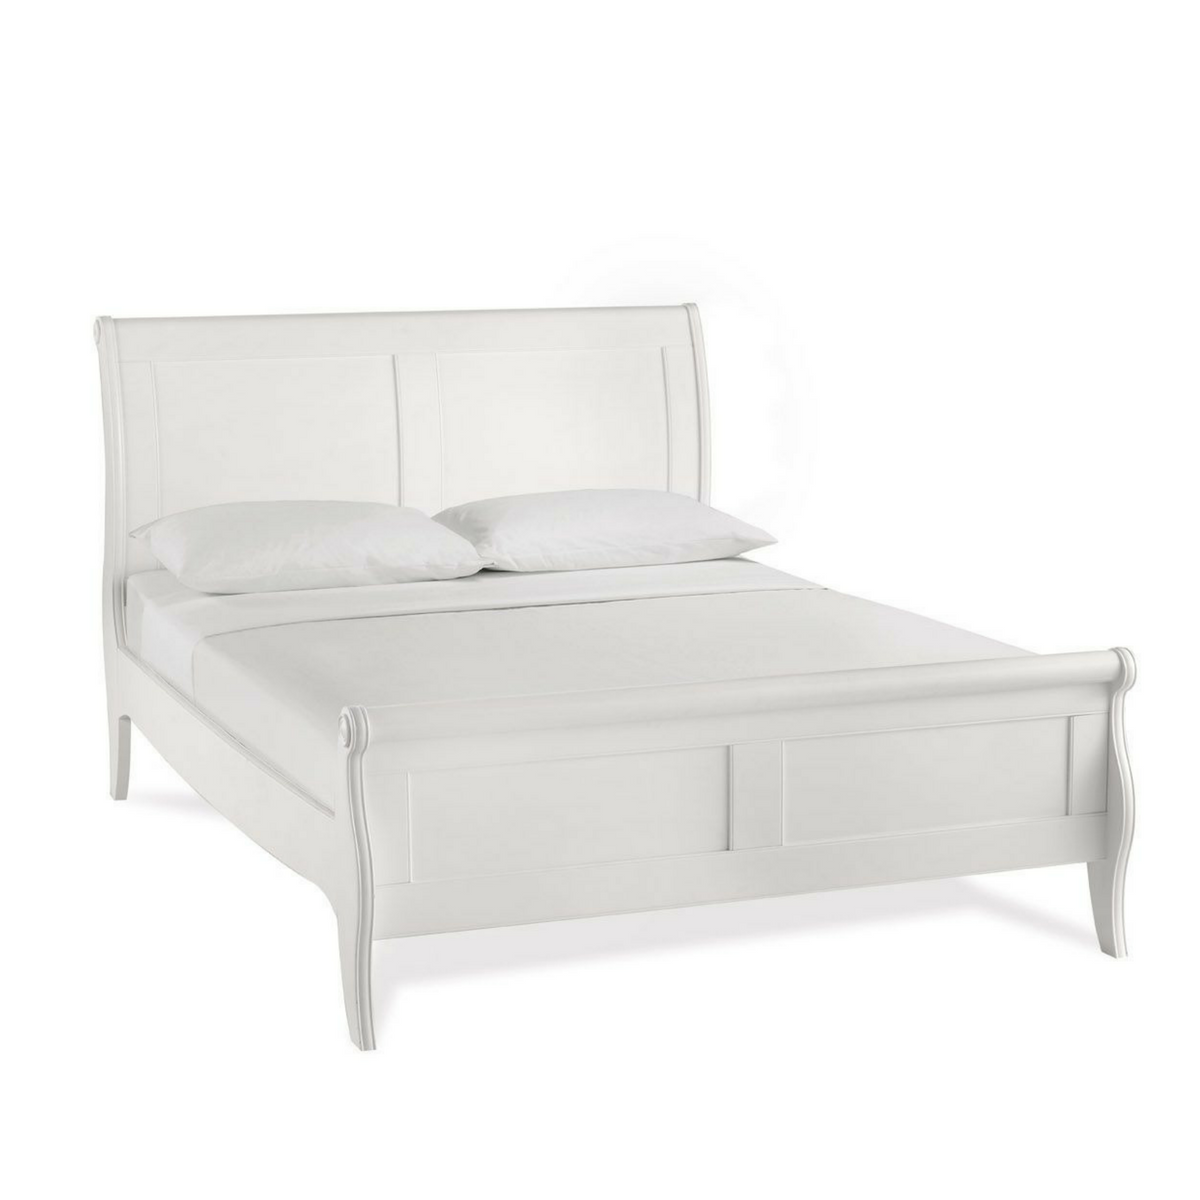 Chanel White Panel Bed.